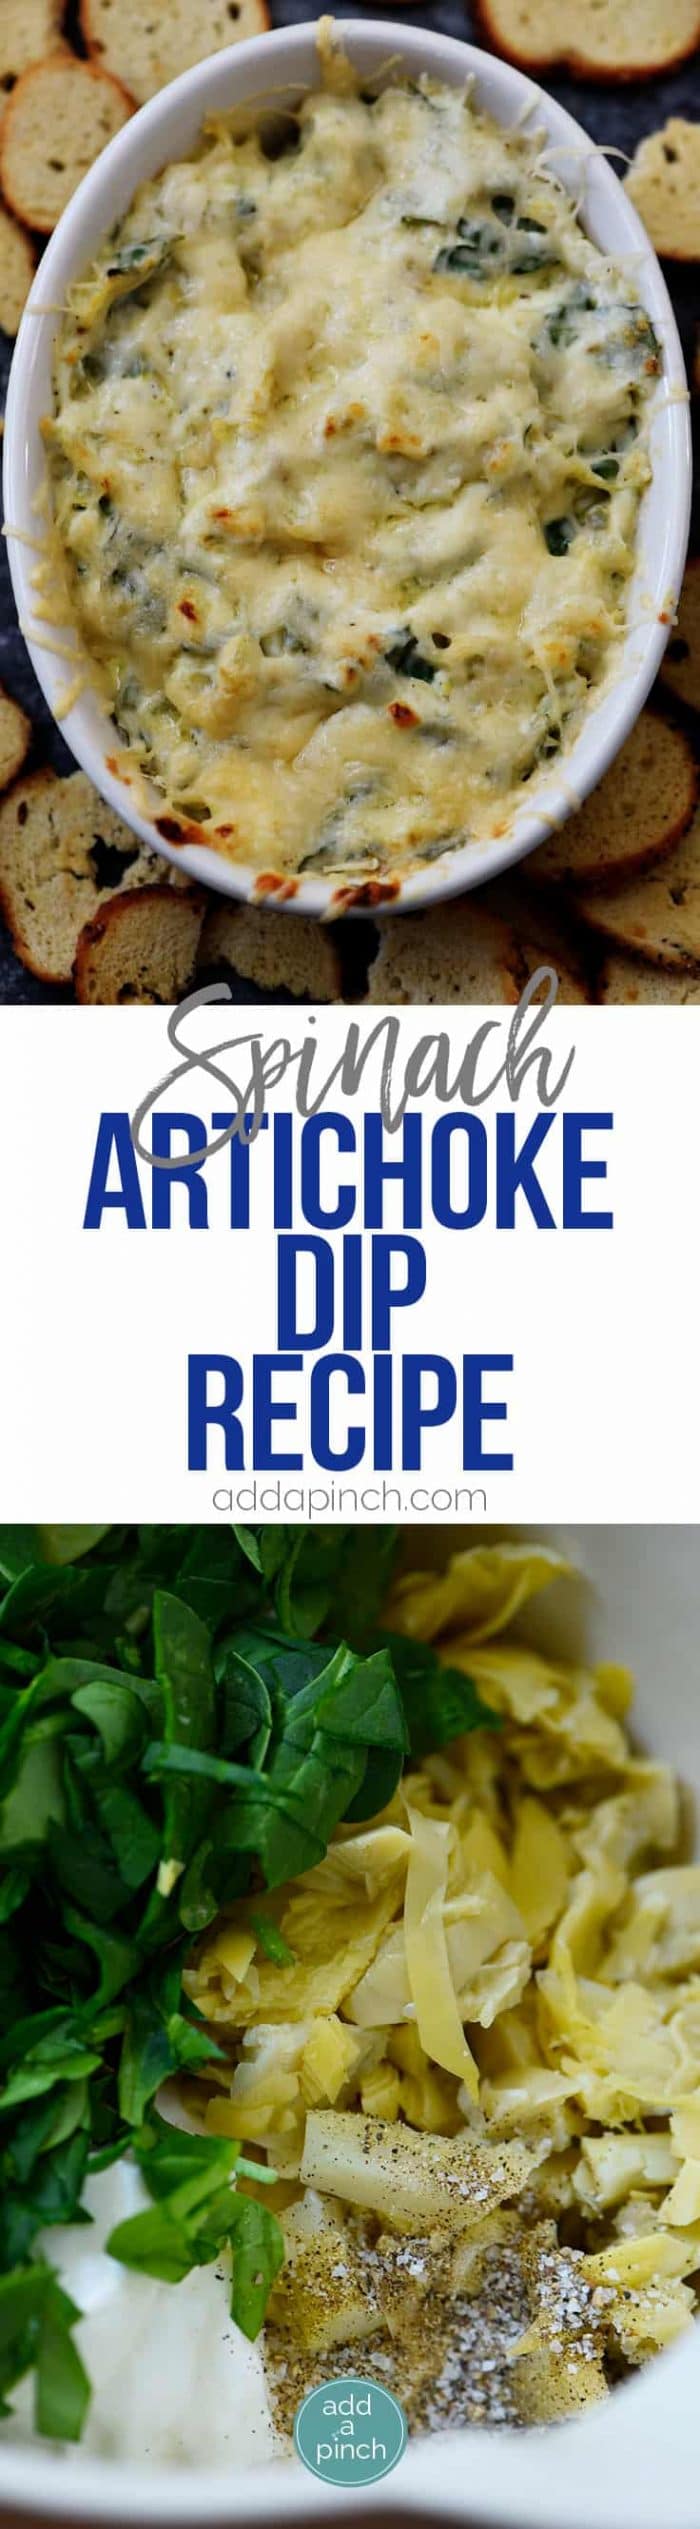 This Hot Spinach Artichoke Dip is so quick and easy! Made of just six ingredients and ready in less than 30 minutes, this spinach artichoke dip is a favorite! // addapinch.com